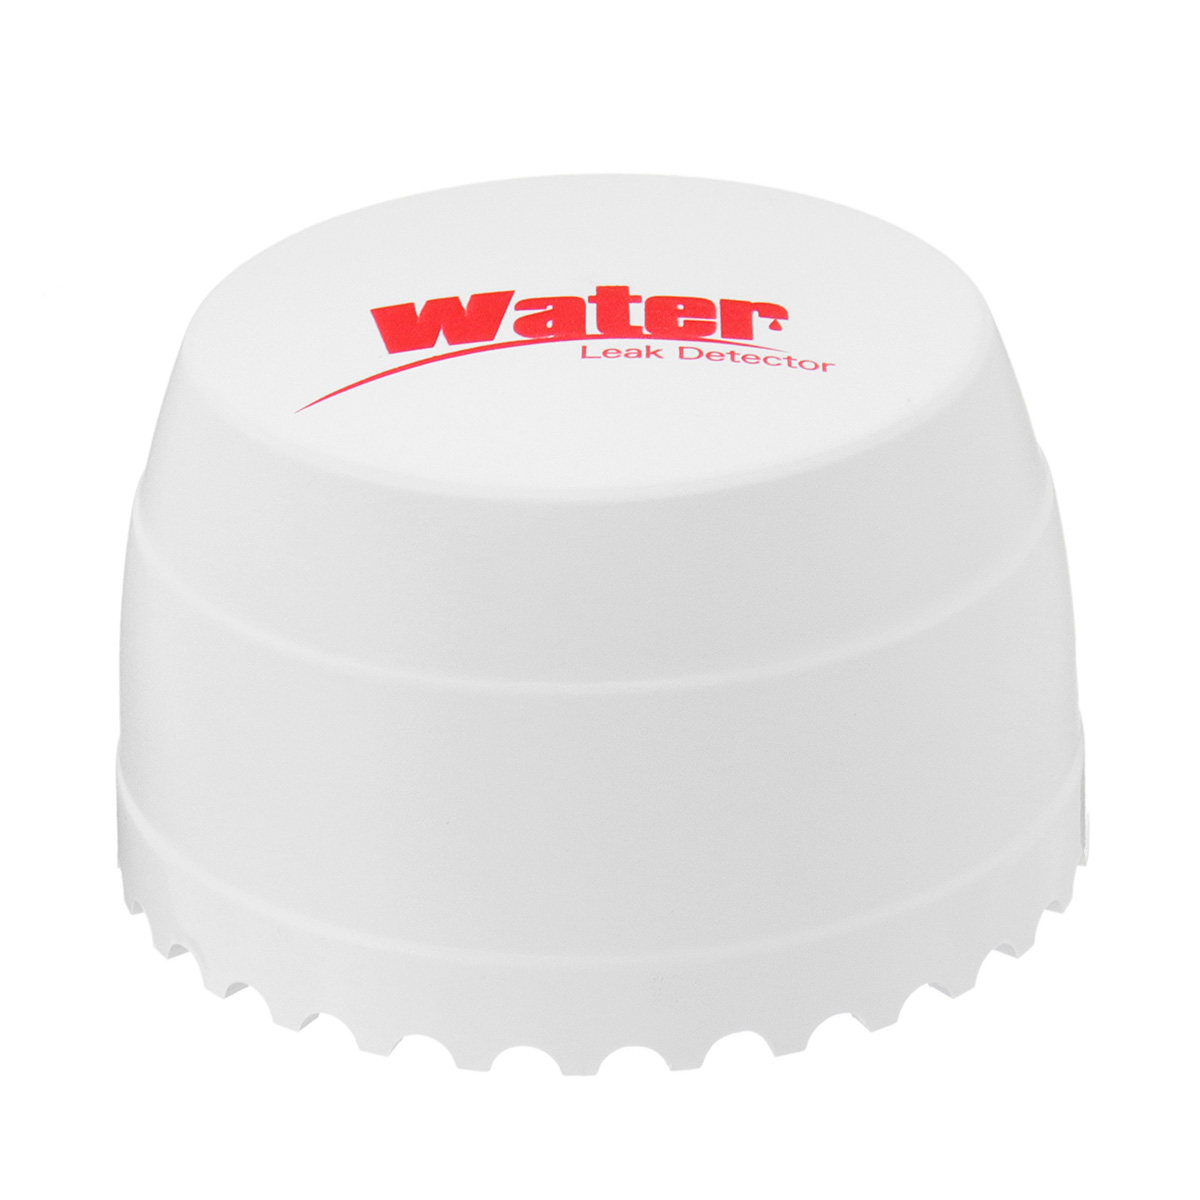 DY-SQ100B-Water-Leakage-Detector-Rustproof-Sensor-Alarm-433MHz-for-Security-Home-Alarm-System-1266537